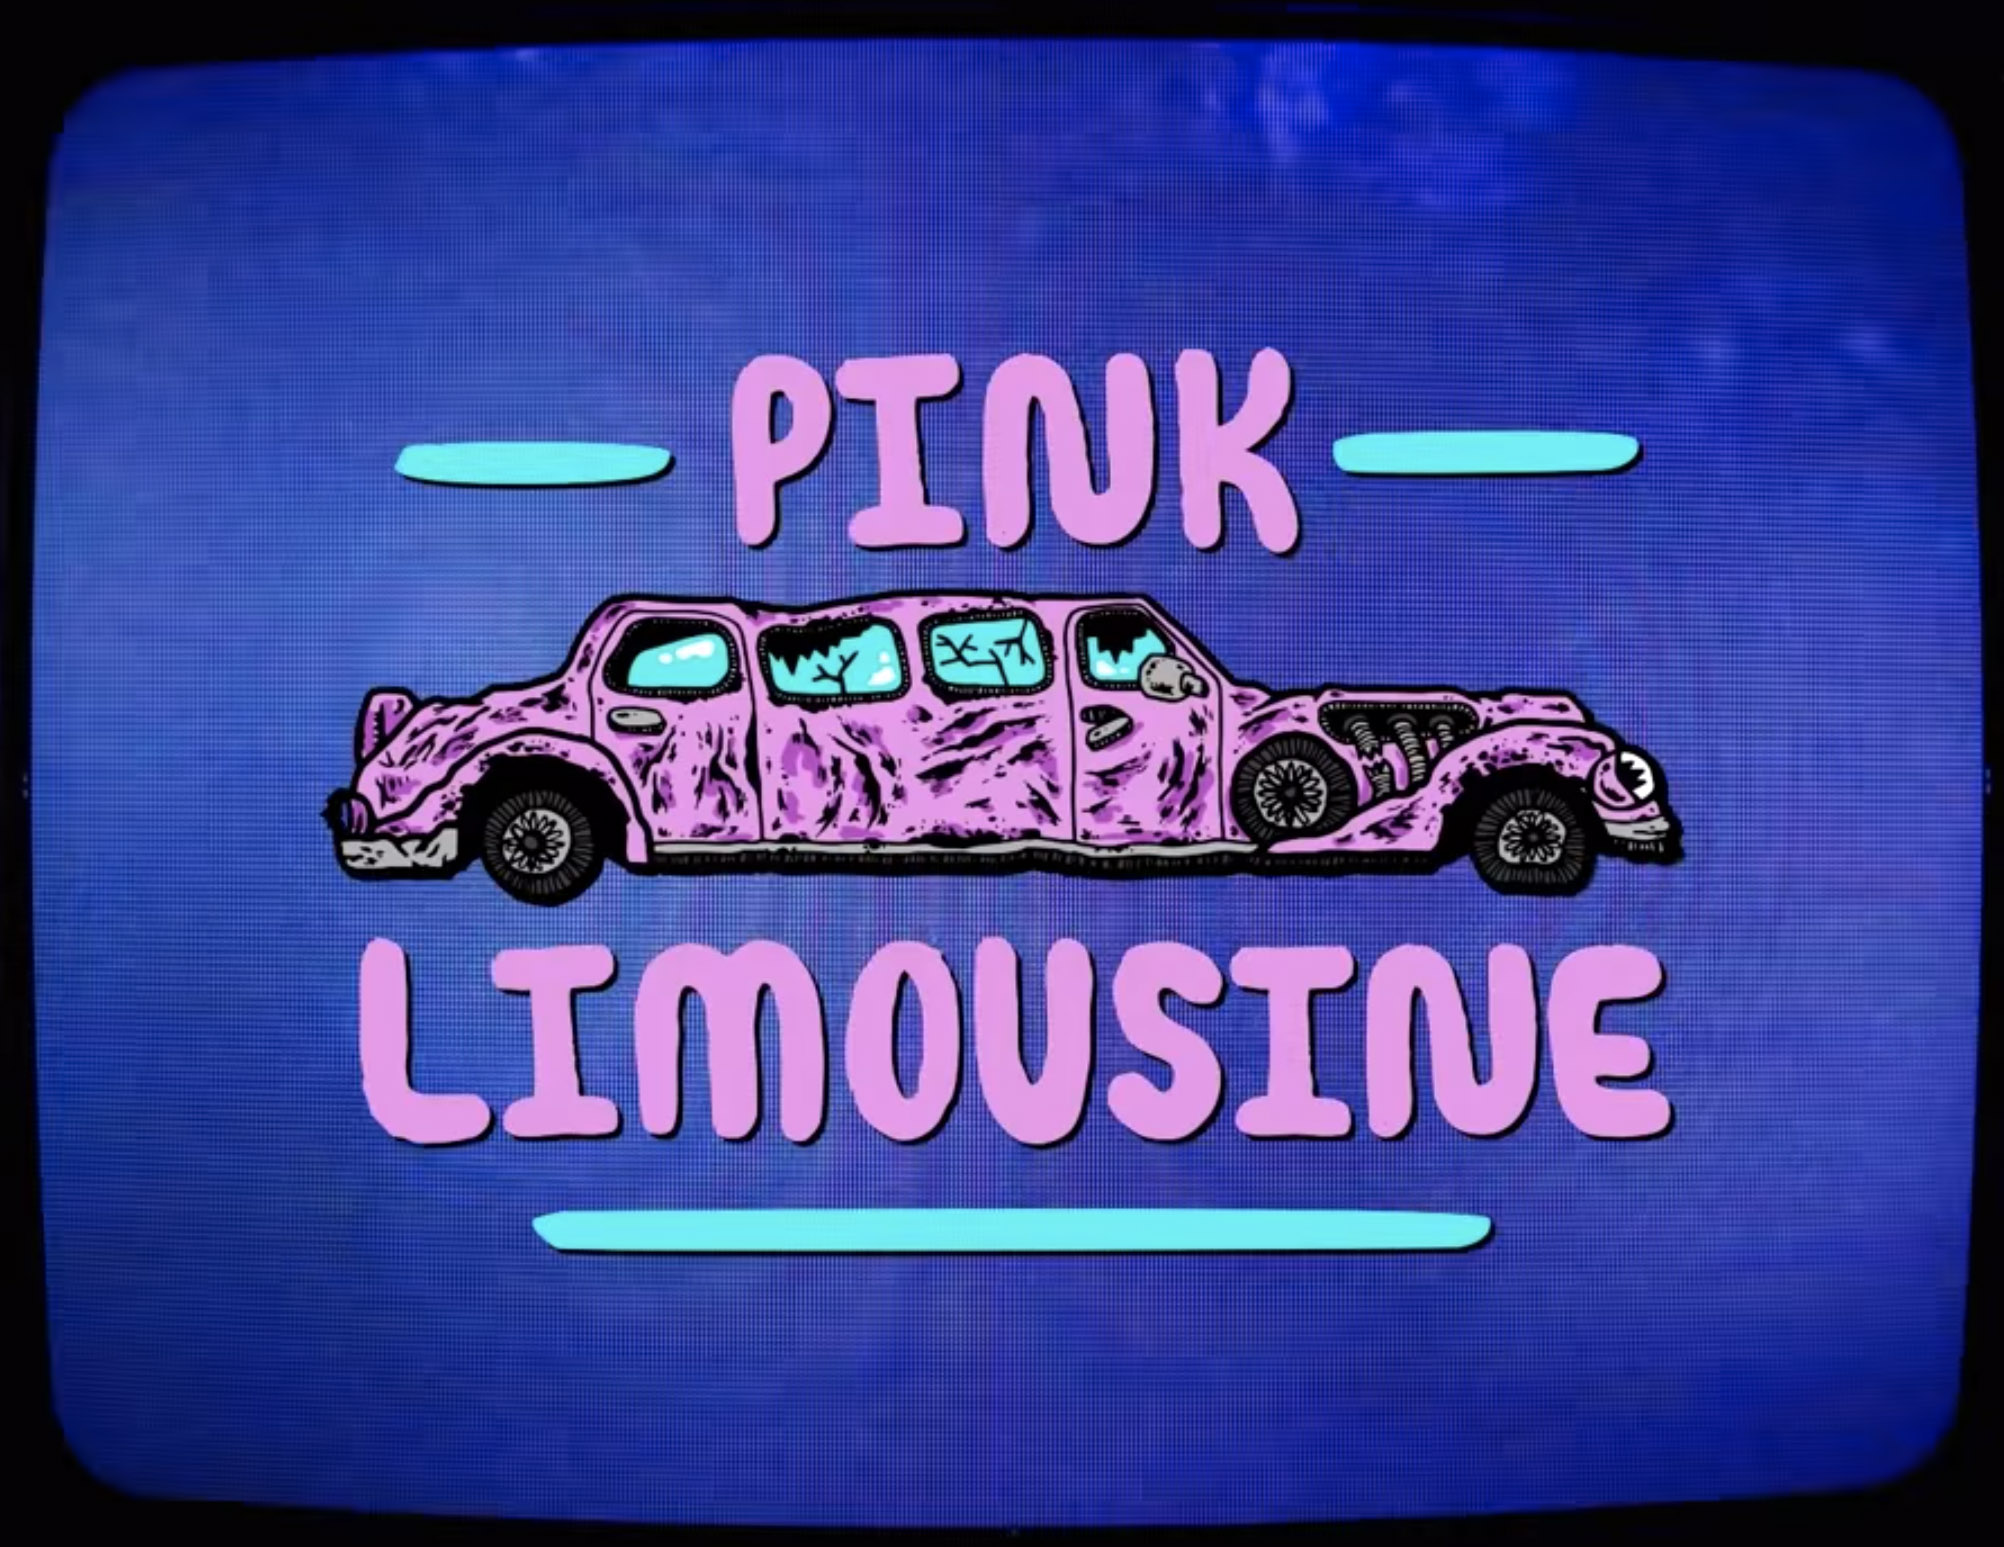 Roger - Pink Limousine cover